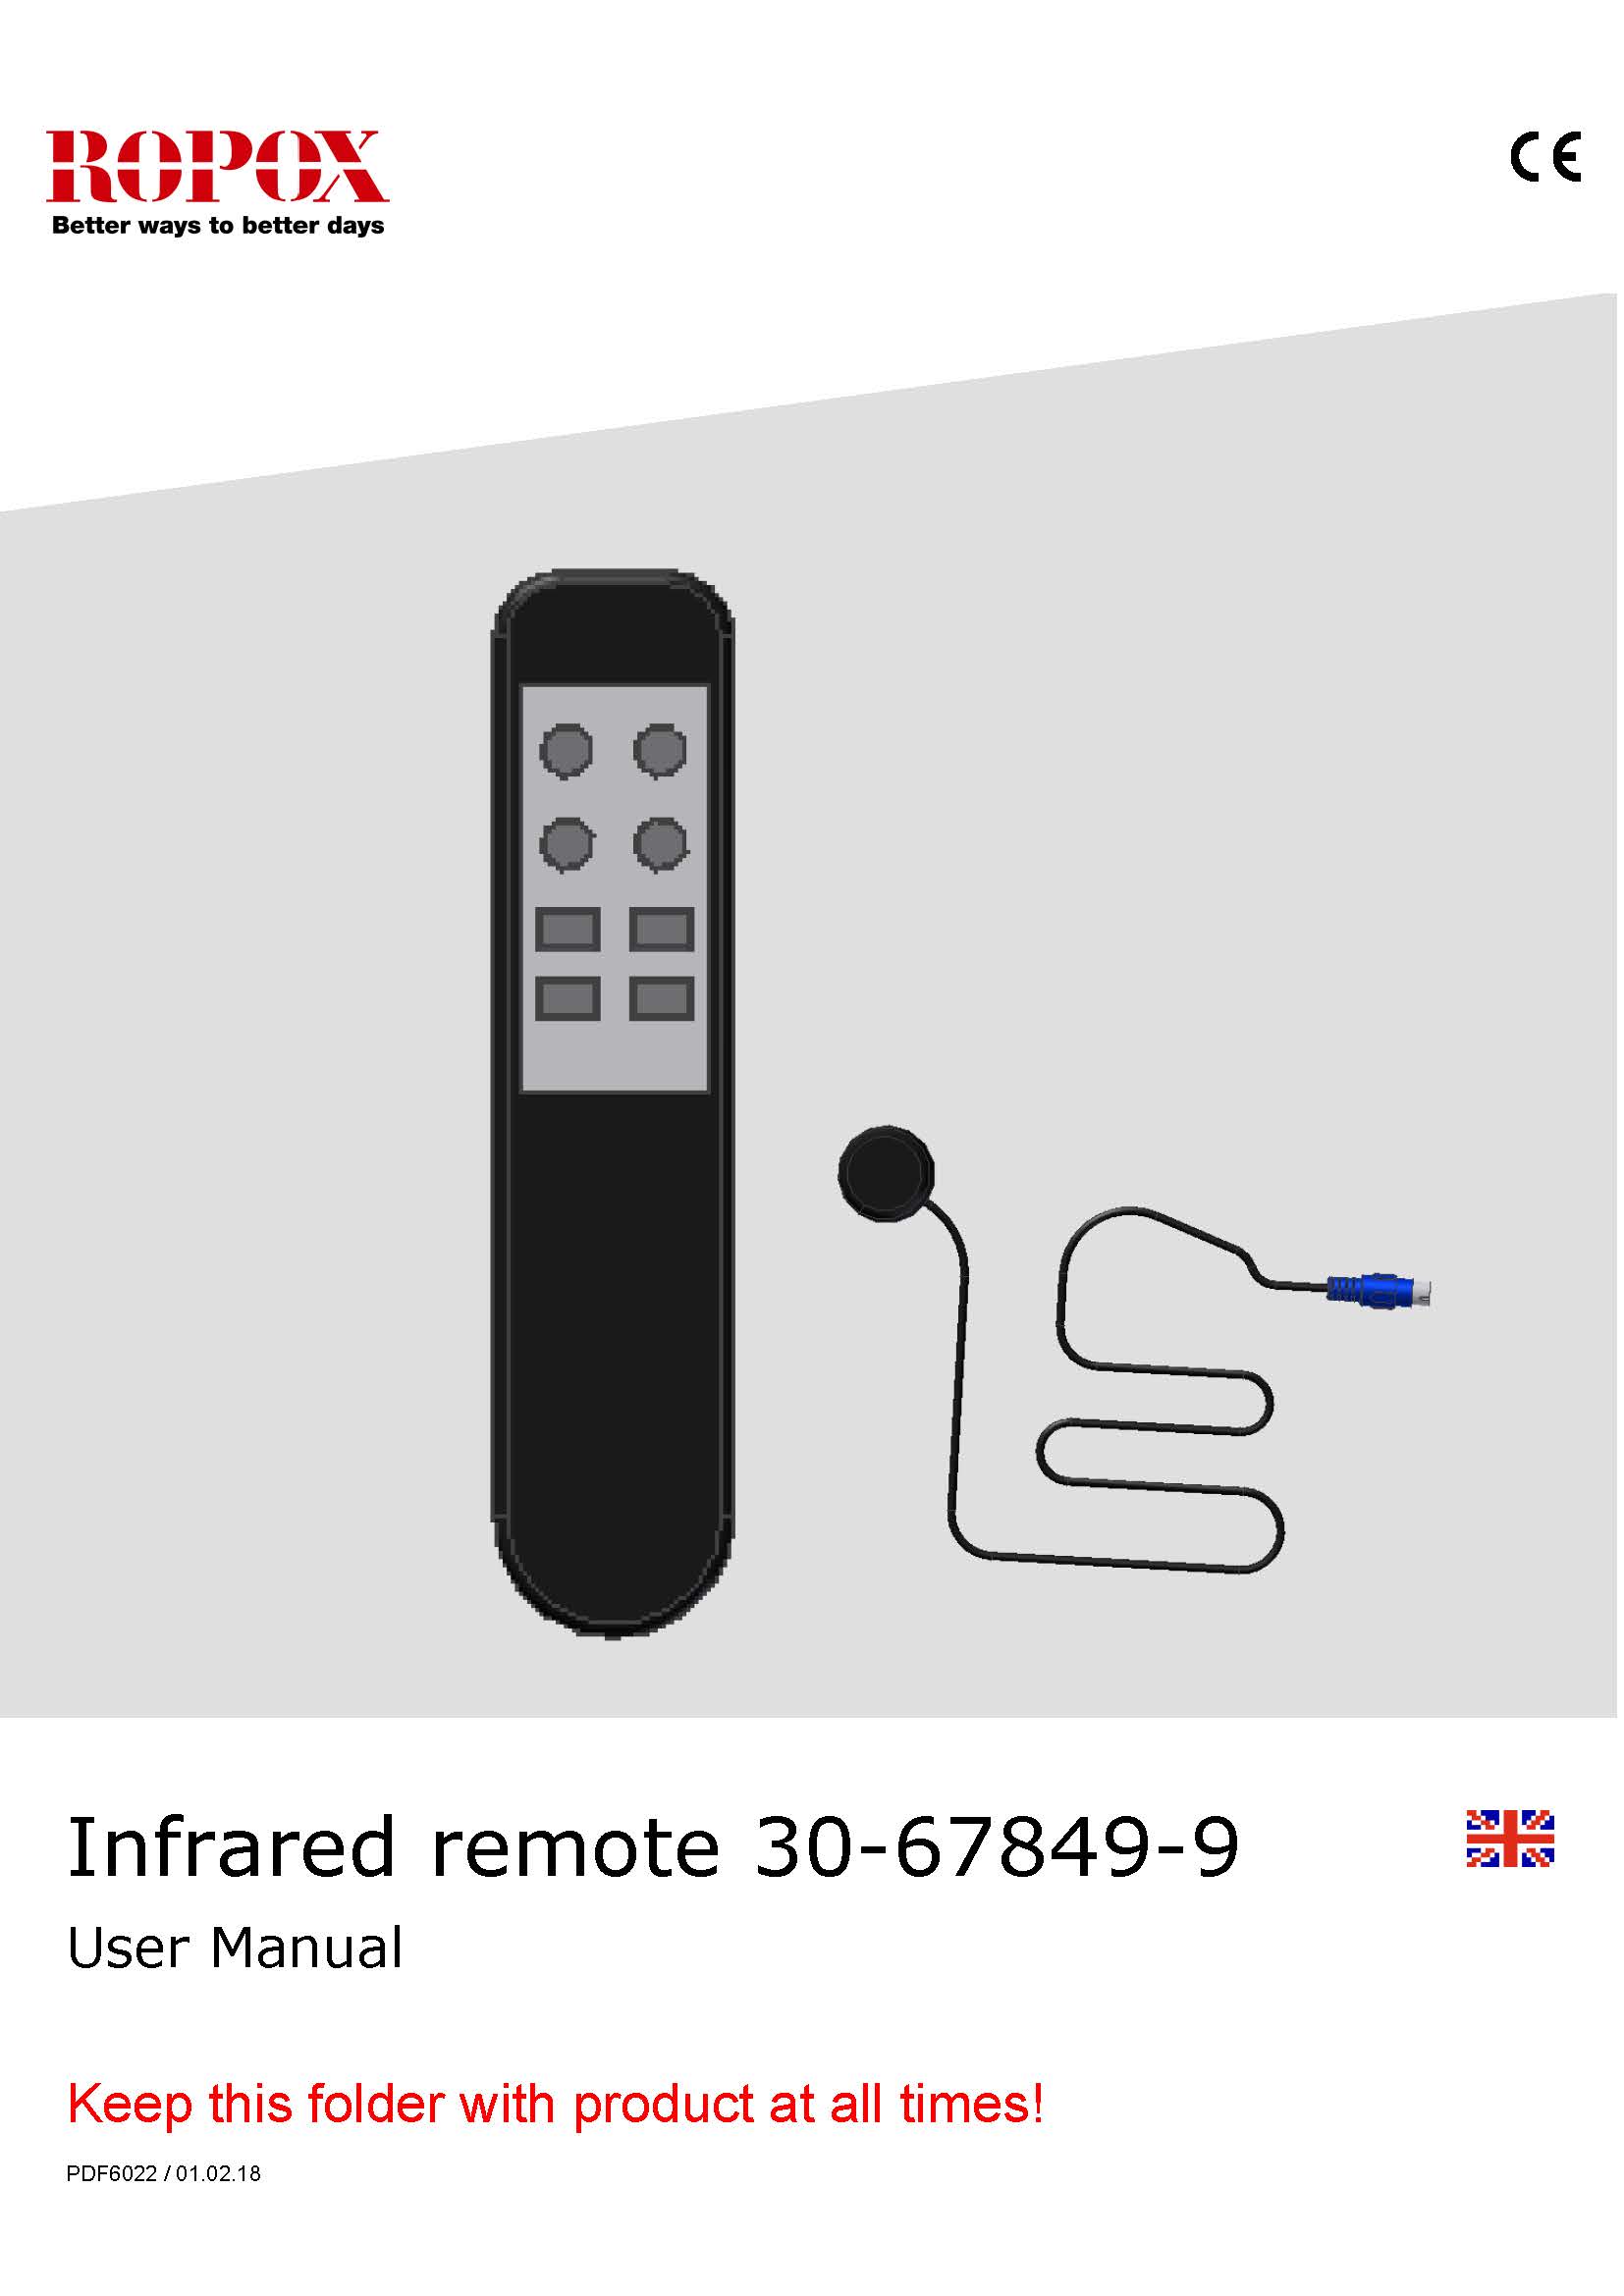 Ropox user manual - Infrared remote 2 channels